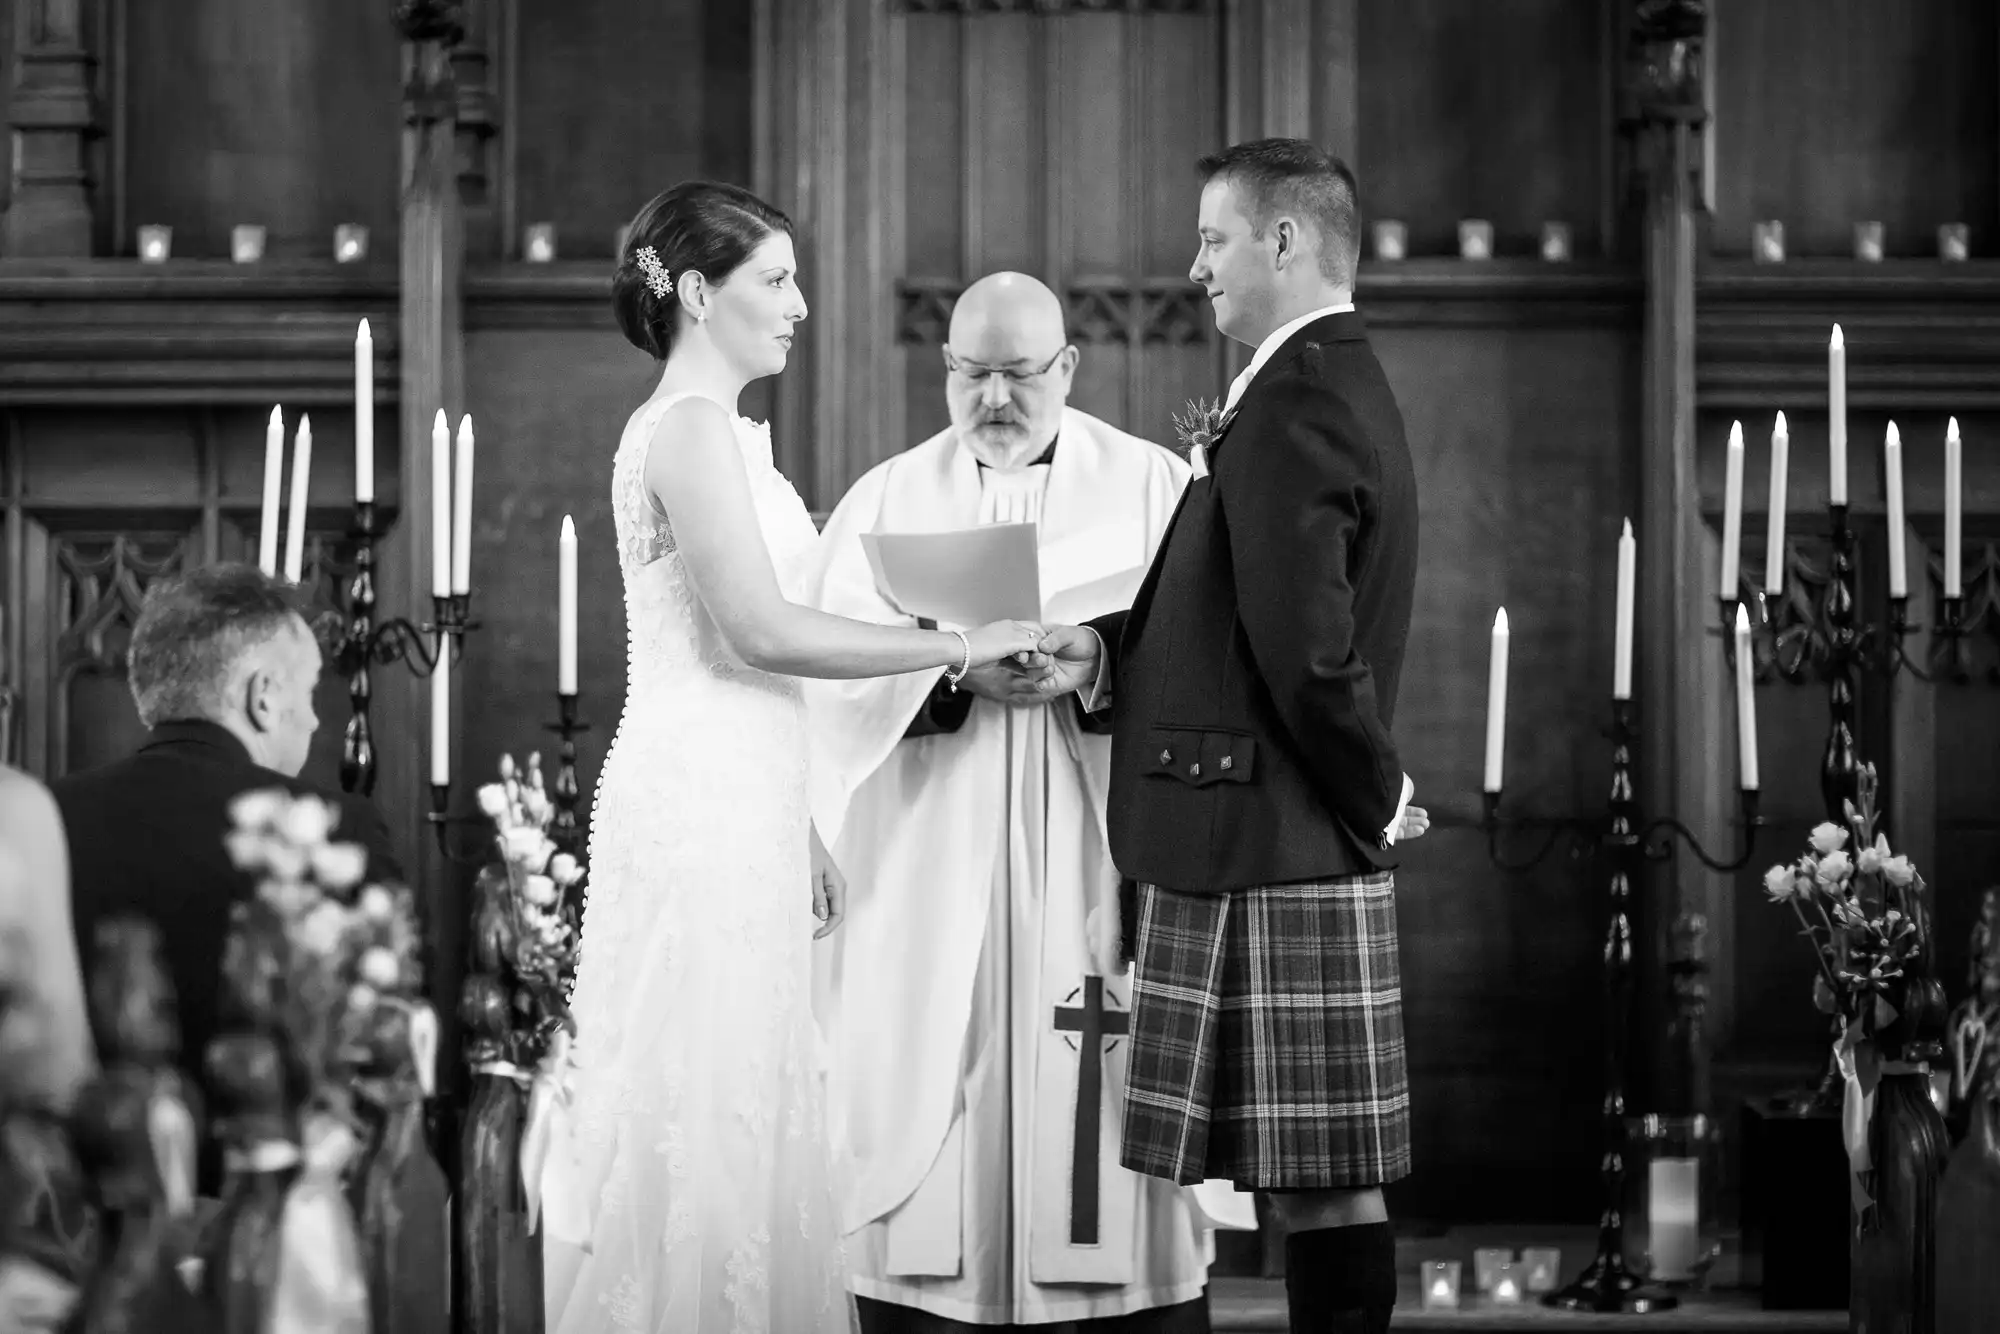 A bride and groom holding hands during their wedding ceremony, officiated by a priest in a church with lit candles.